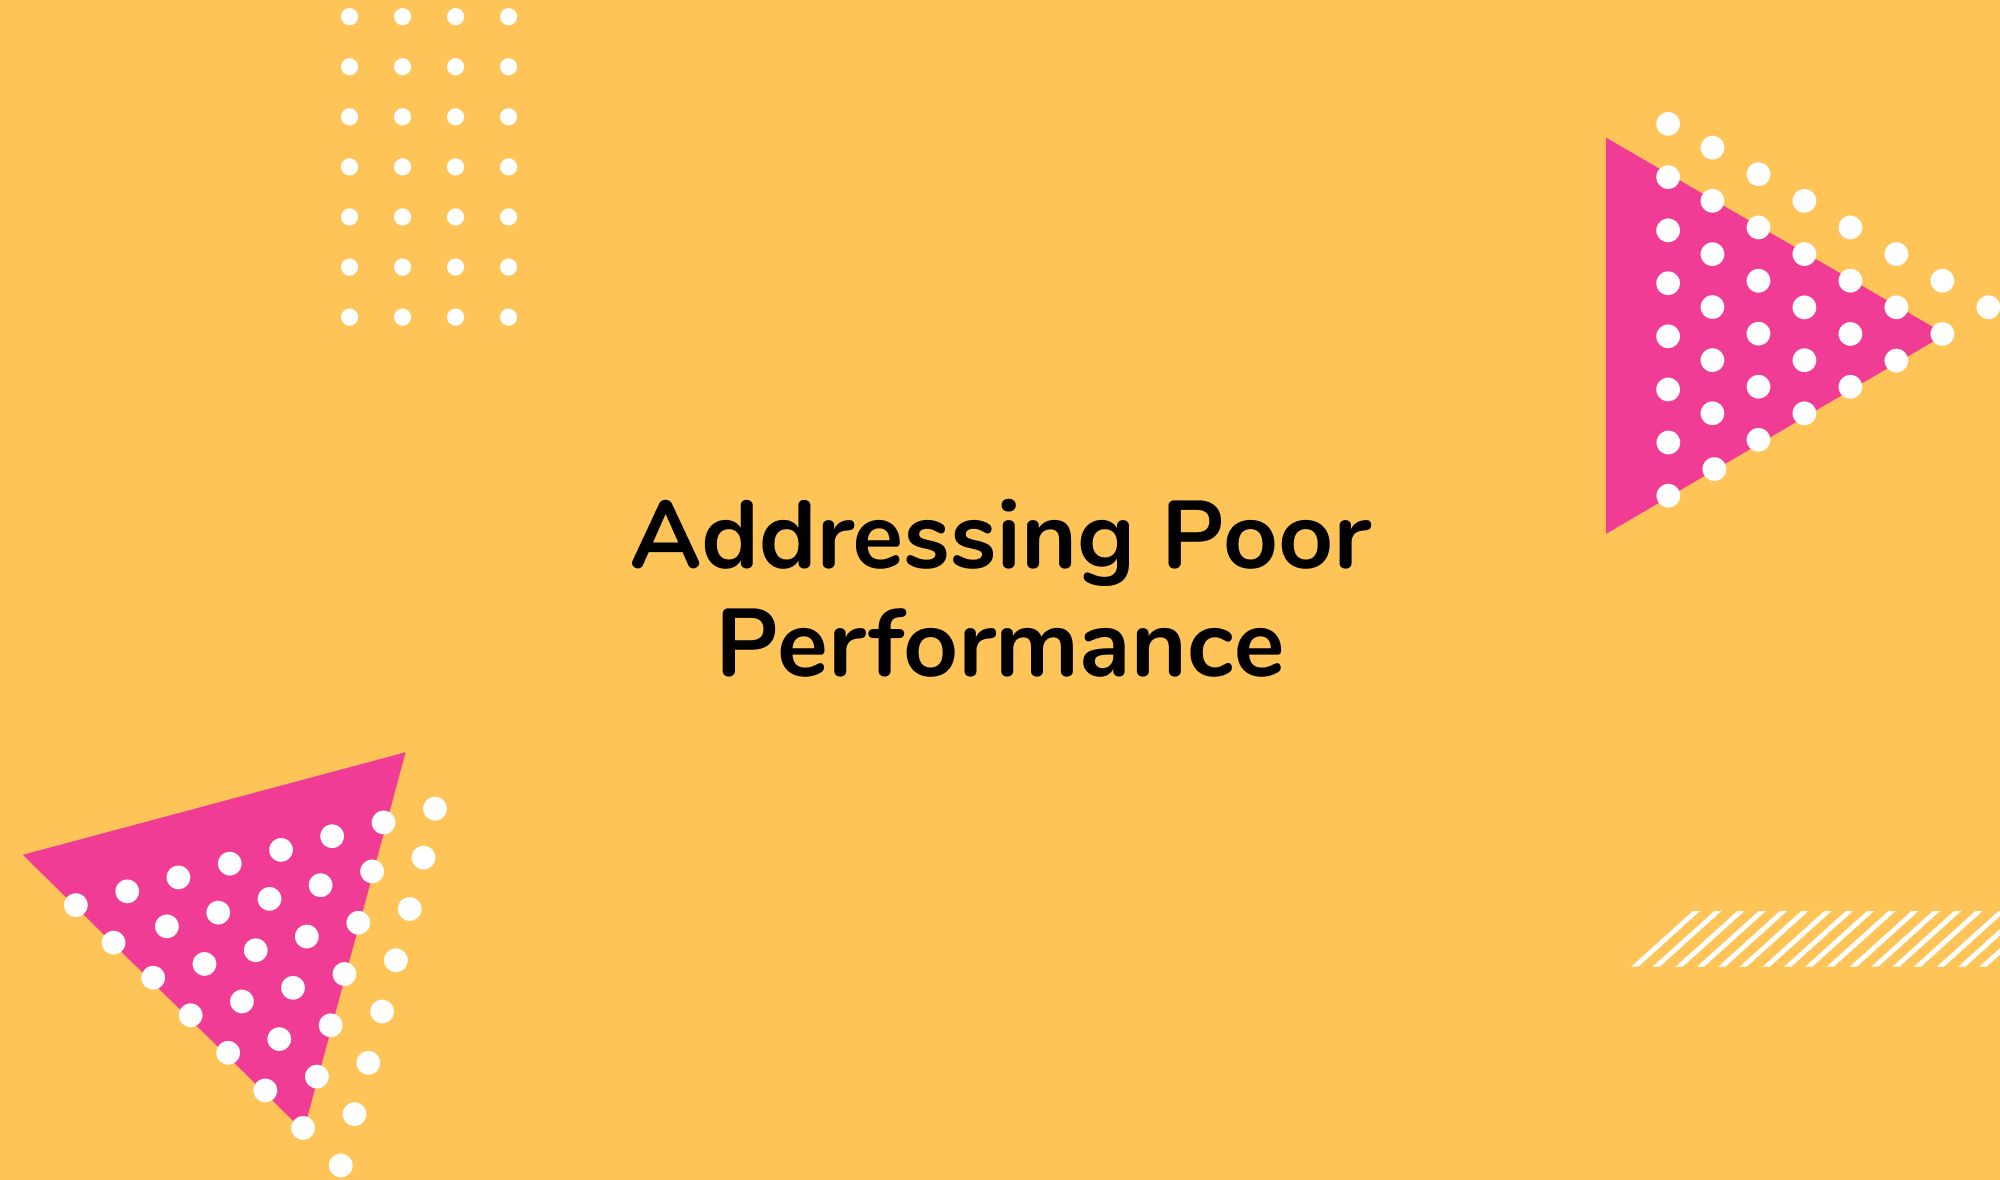 Addressing Poor Performance: Management's Role